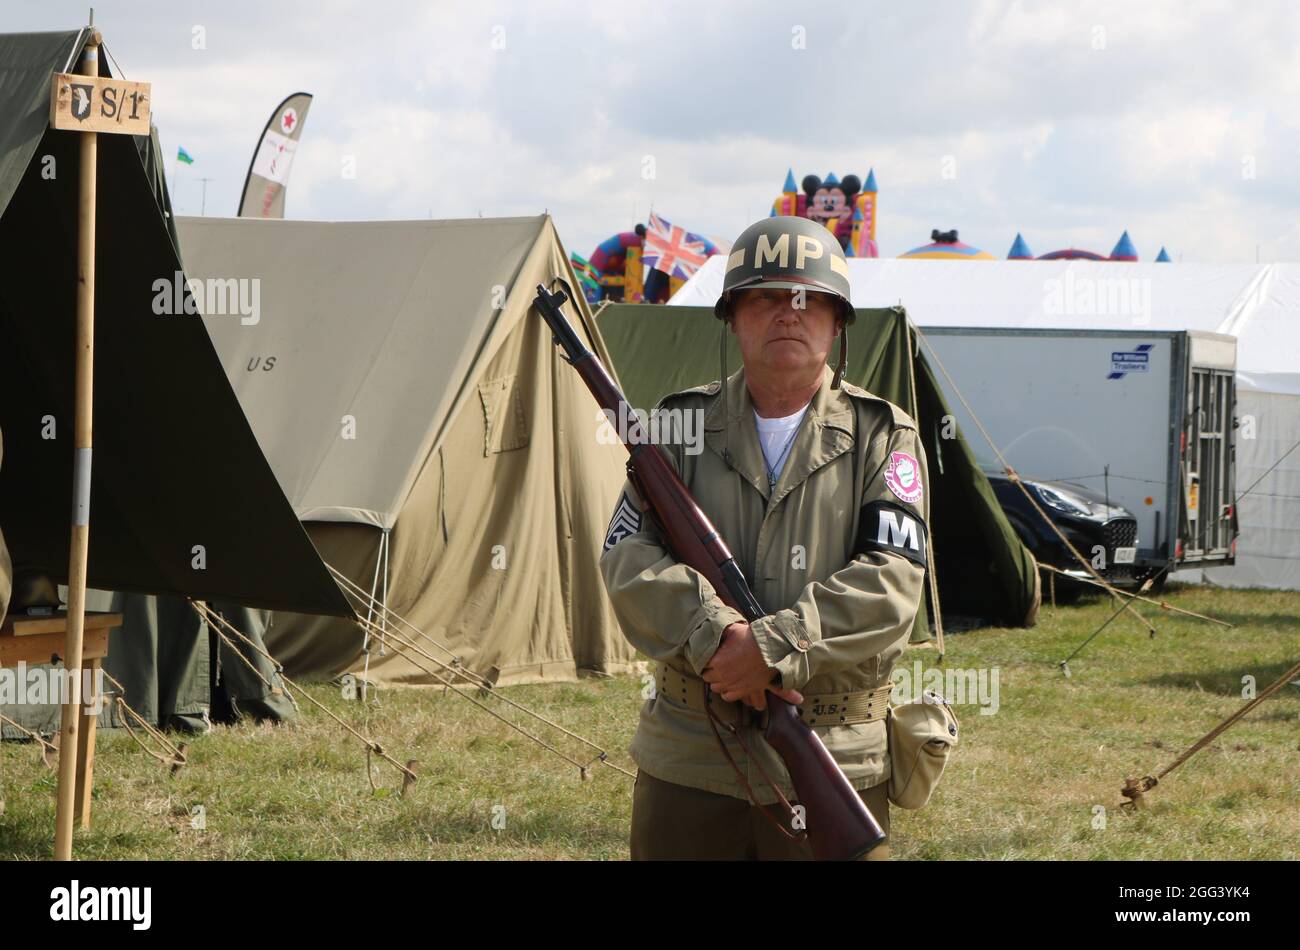 Tanks, Trucks and Firepower Show, Rugby, 2021 agosto - 1940s American Reenactment. Foto Stock